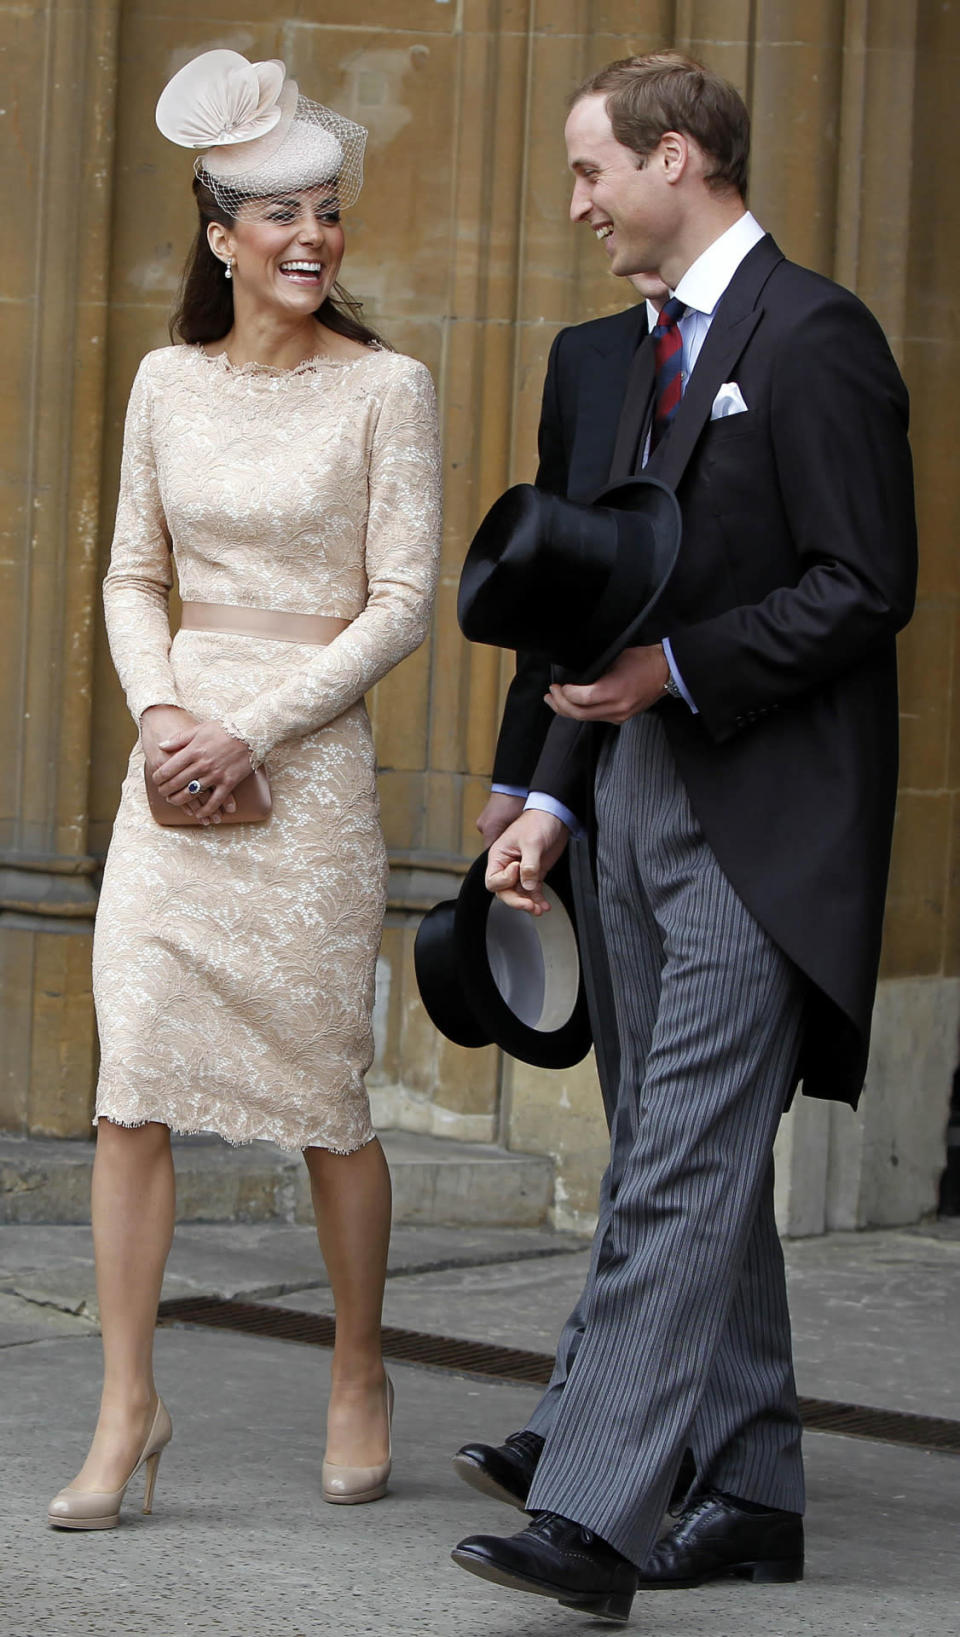 <p>The final Diamond Jubilee celebrations saw Kate in a lacy Alexander McQueen look worn with a nude hat by Jane Taylor. The dress matched the Duchess’s Prada clutch perfectly.</p><p><i>[Photo: PA]</i></p>